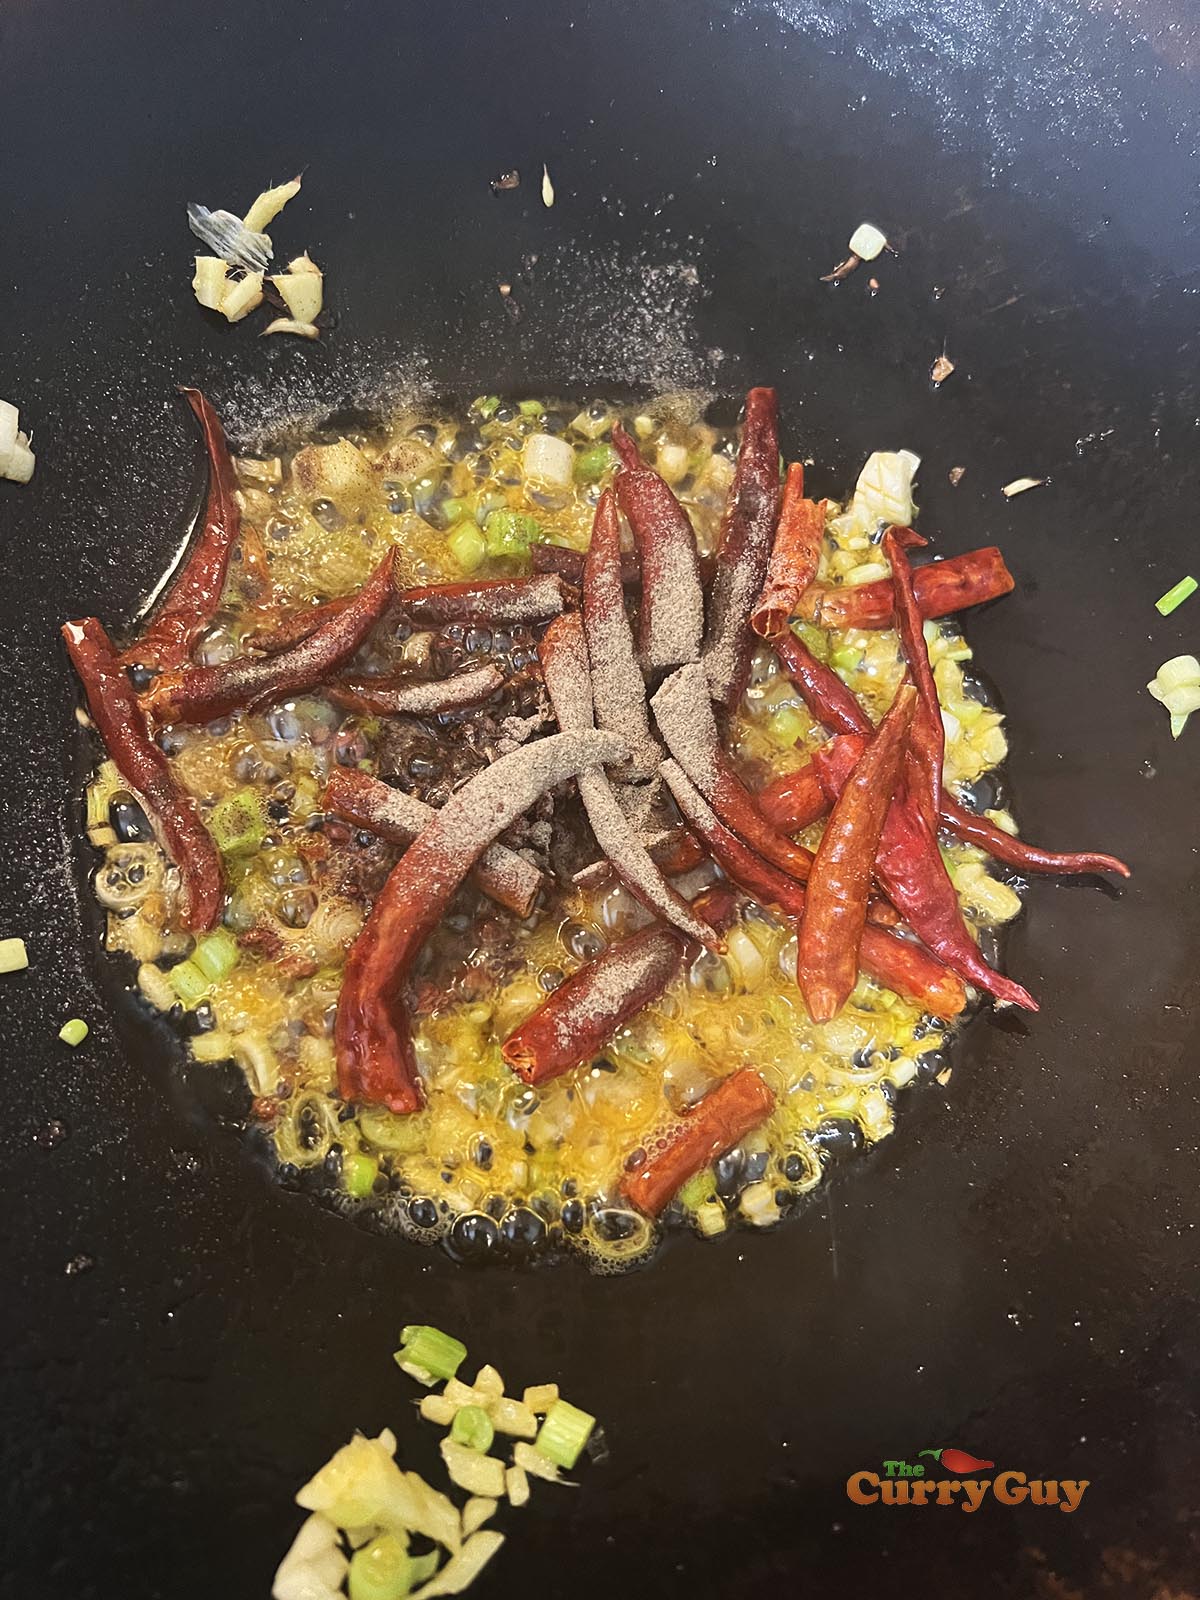 Adding dried chillies and white pepper